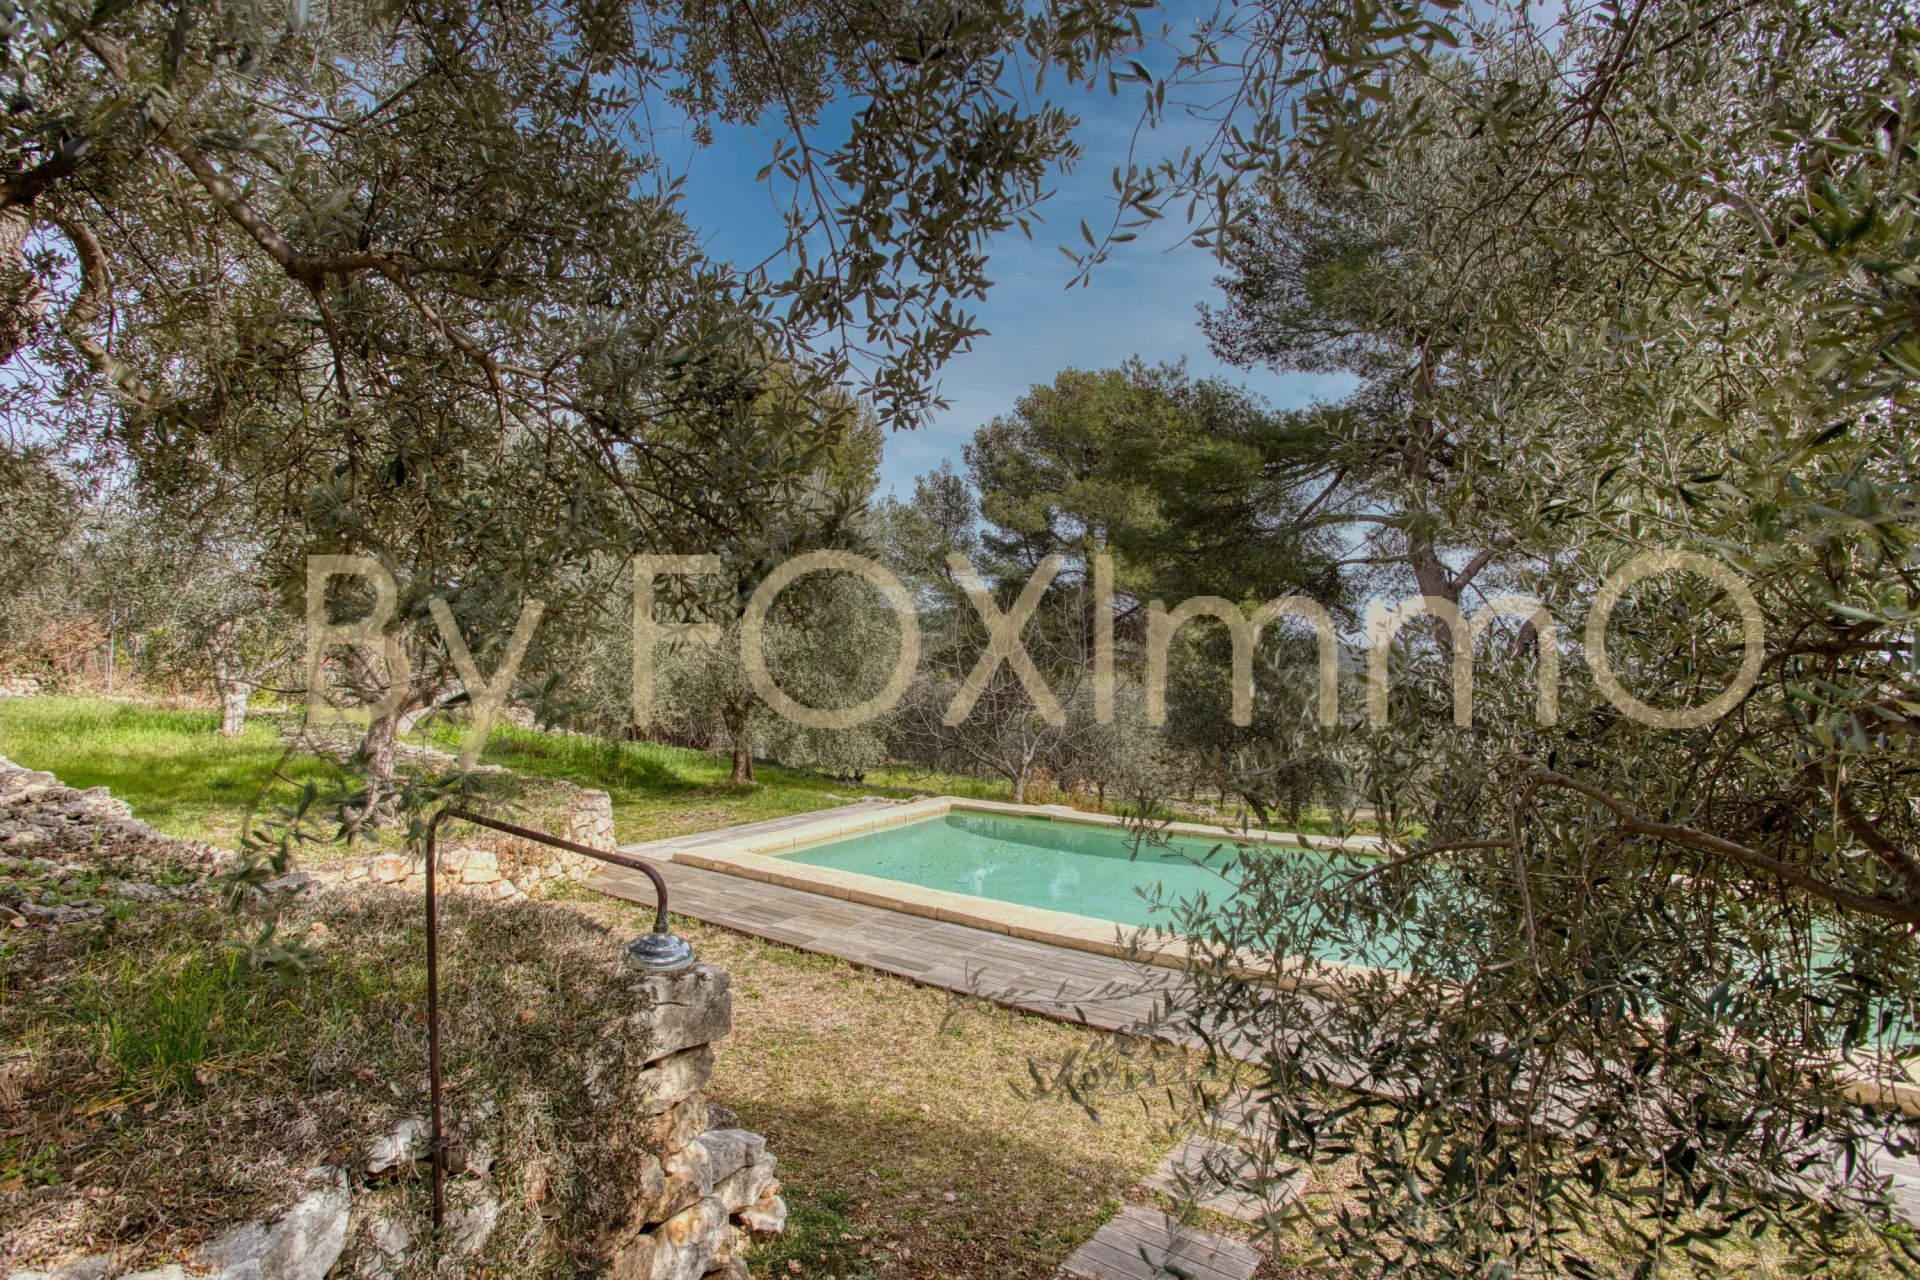 Côte d'Azur, near Grasse and Cannes, magnificent villa, Bastide in absolute peace and quiet, dominant position, panoramic view, swimming pool, grounds with olive trees